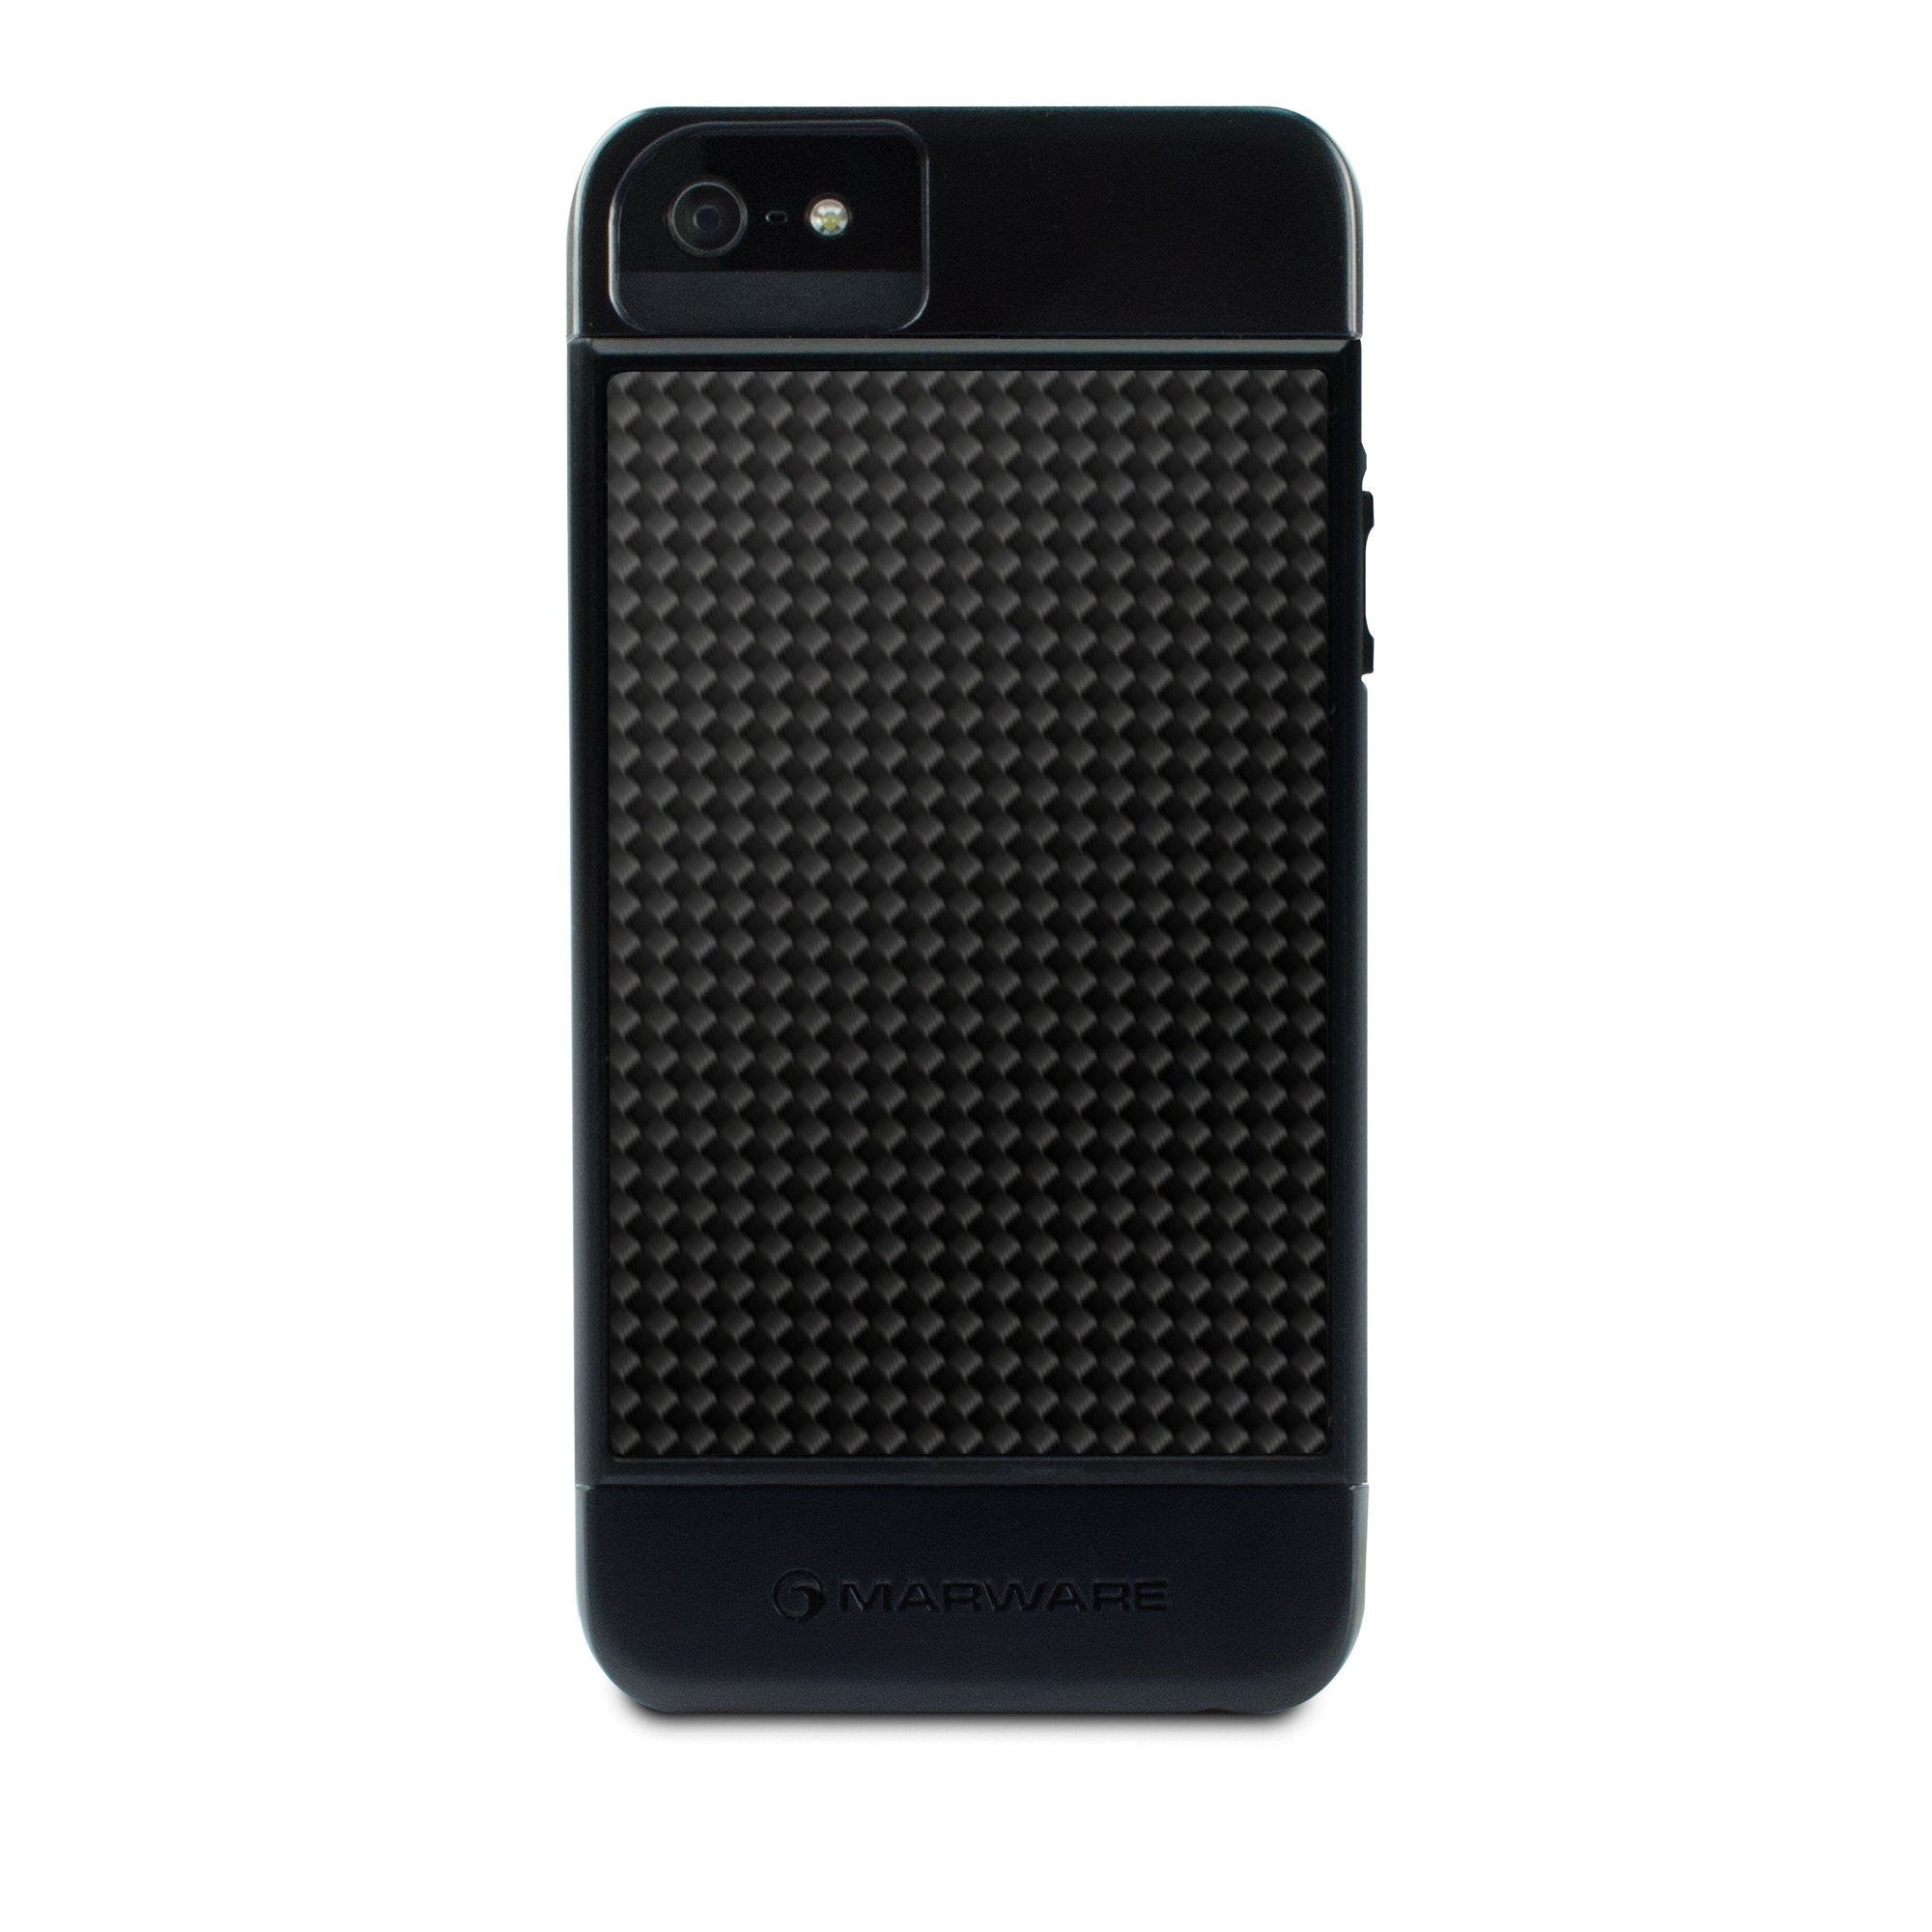 Marware ADRE1029 rEVOLUTION for iPhone 5 - 1 Pack - Retail Packaging - Black